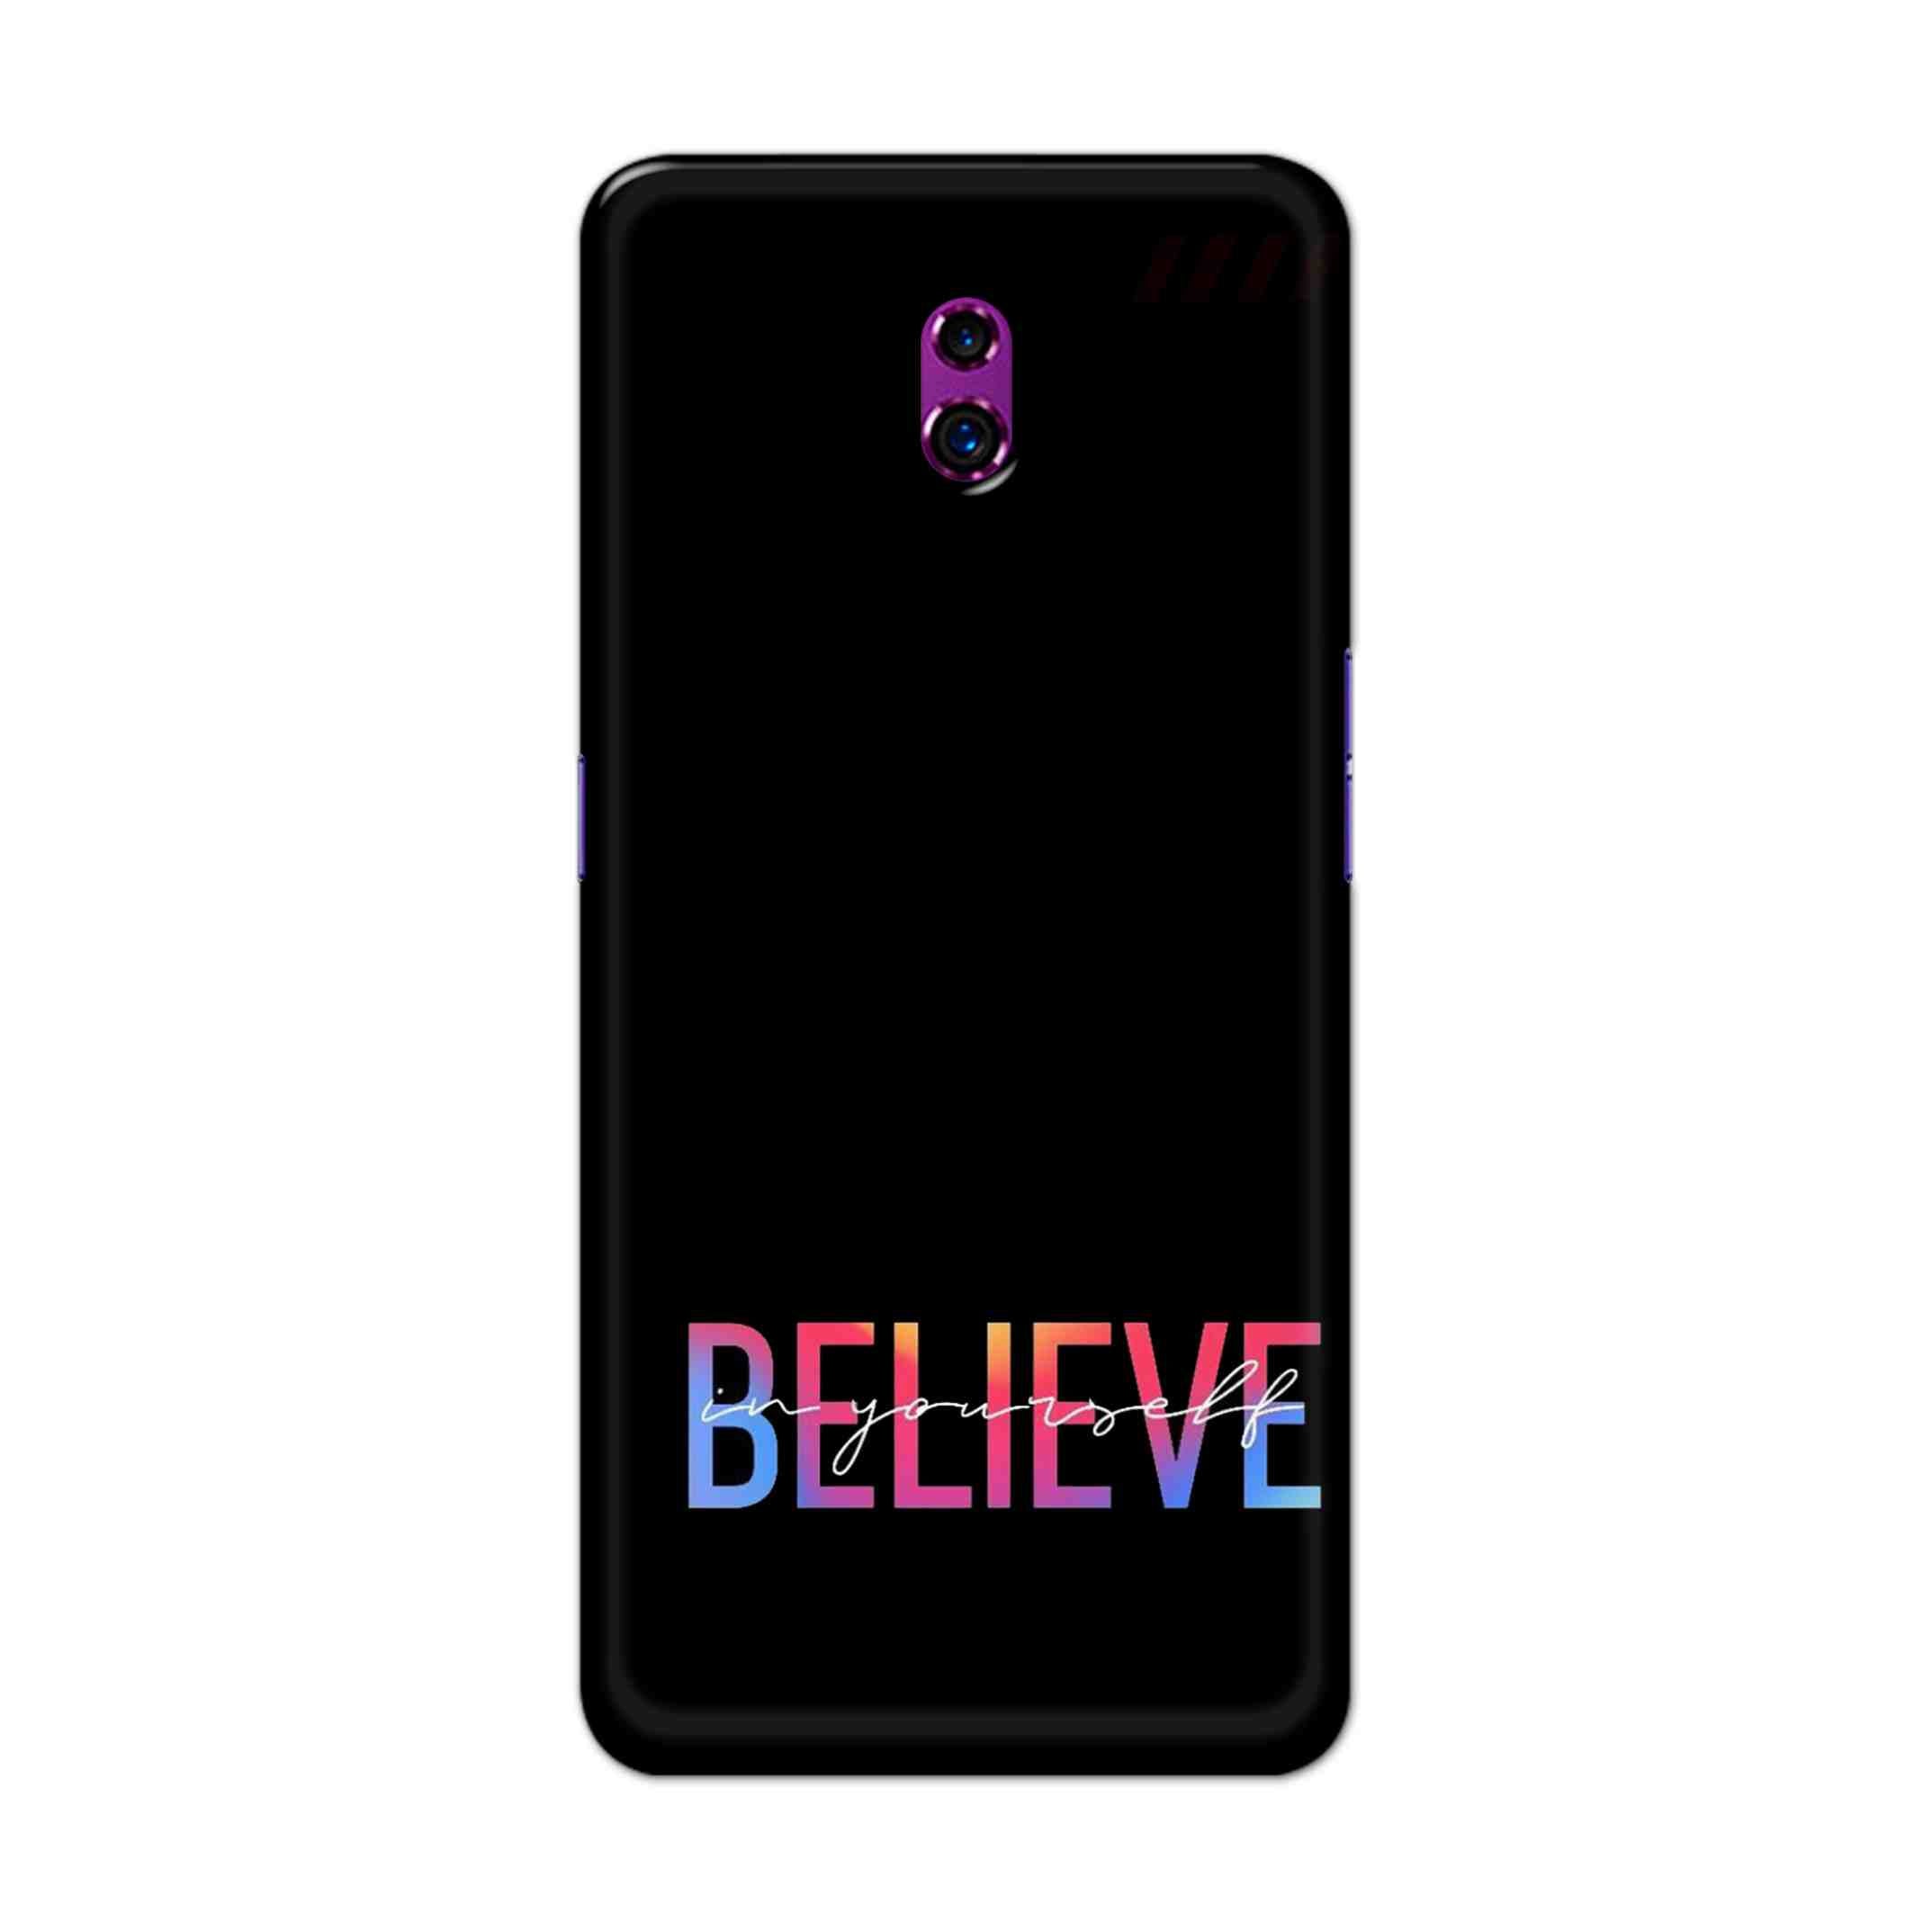 Buy Believe Hard Back Mobile Phone Case Cover For Oppo Reno Online